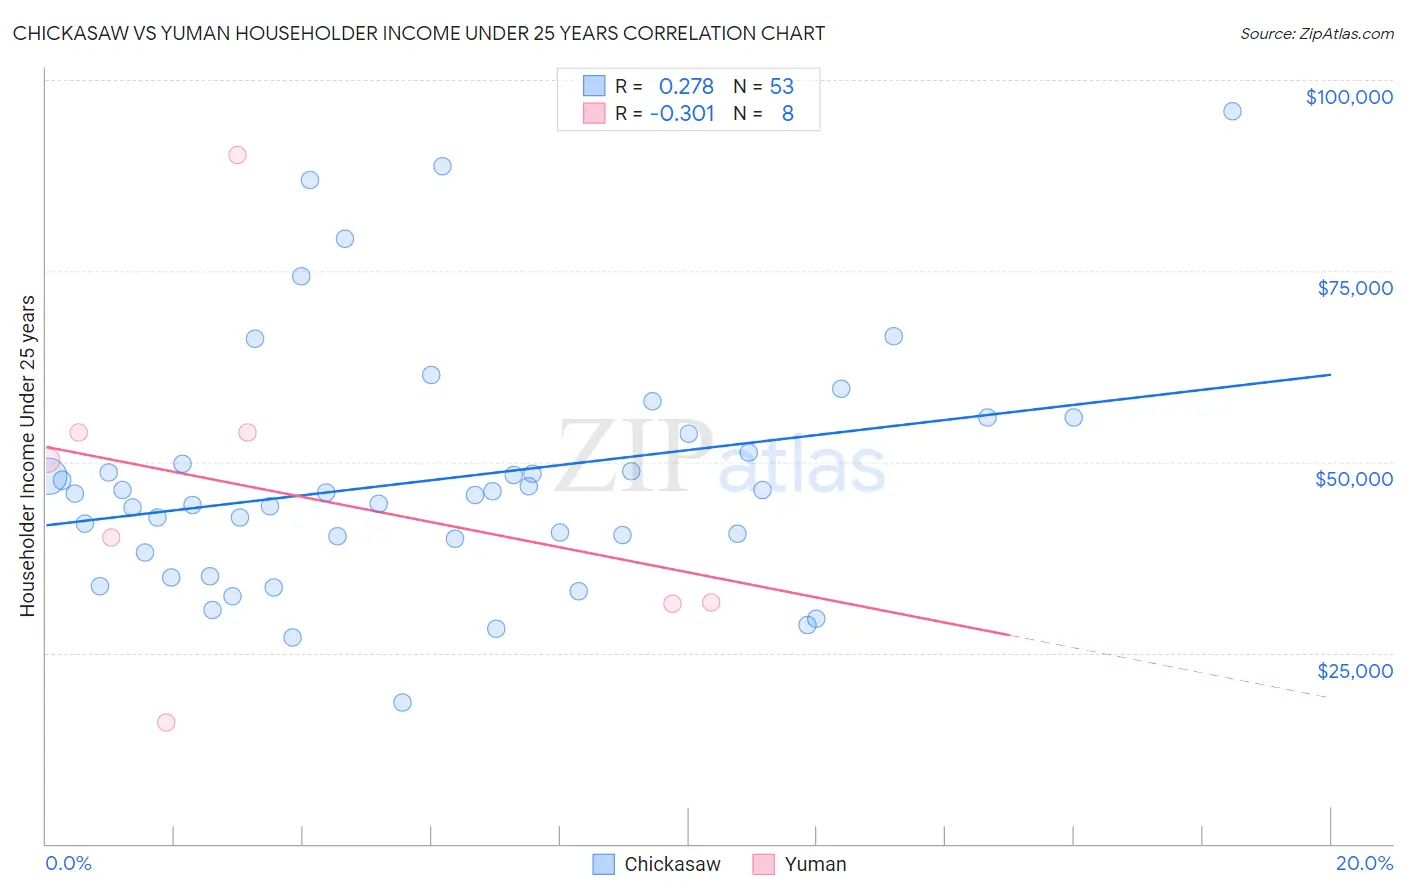 Chickasaw vs Yuman Householder Income Under 25 years